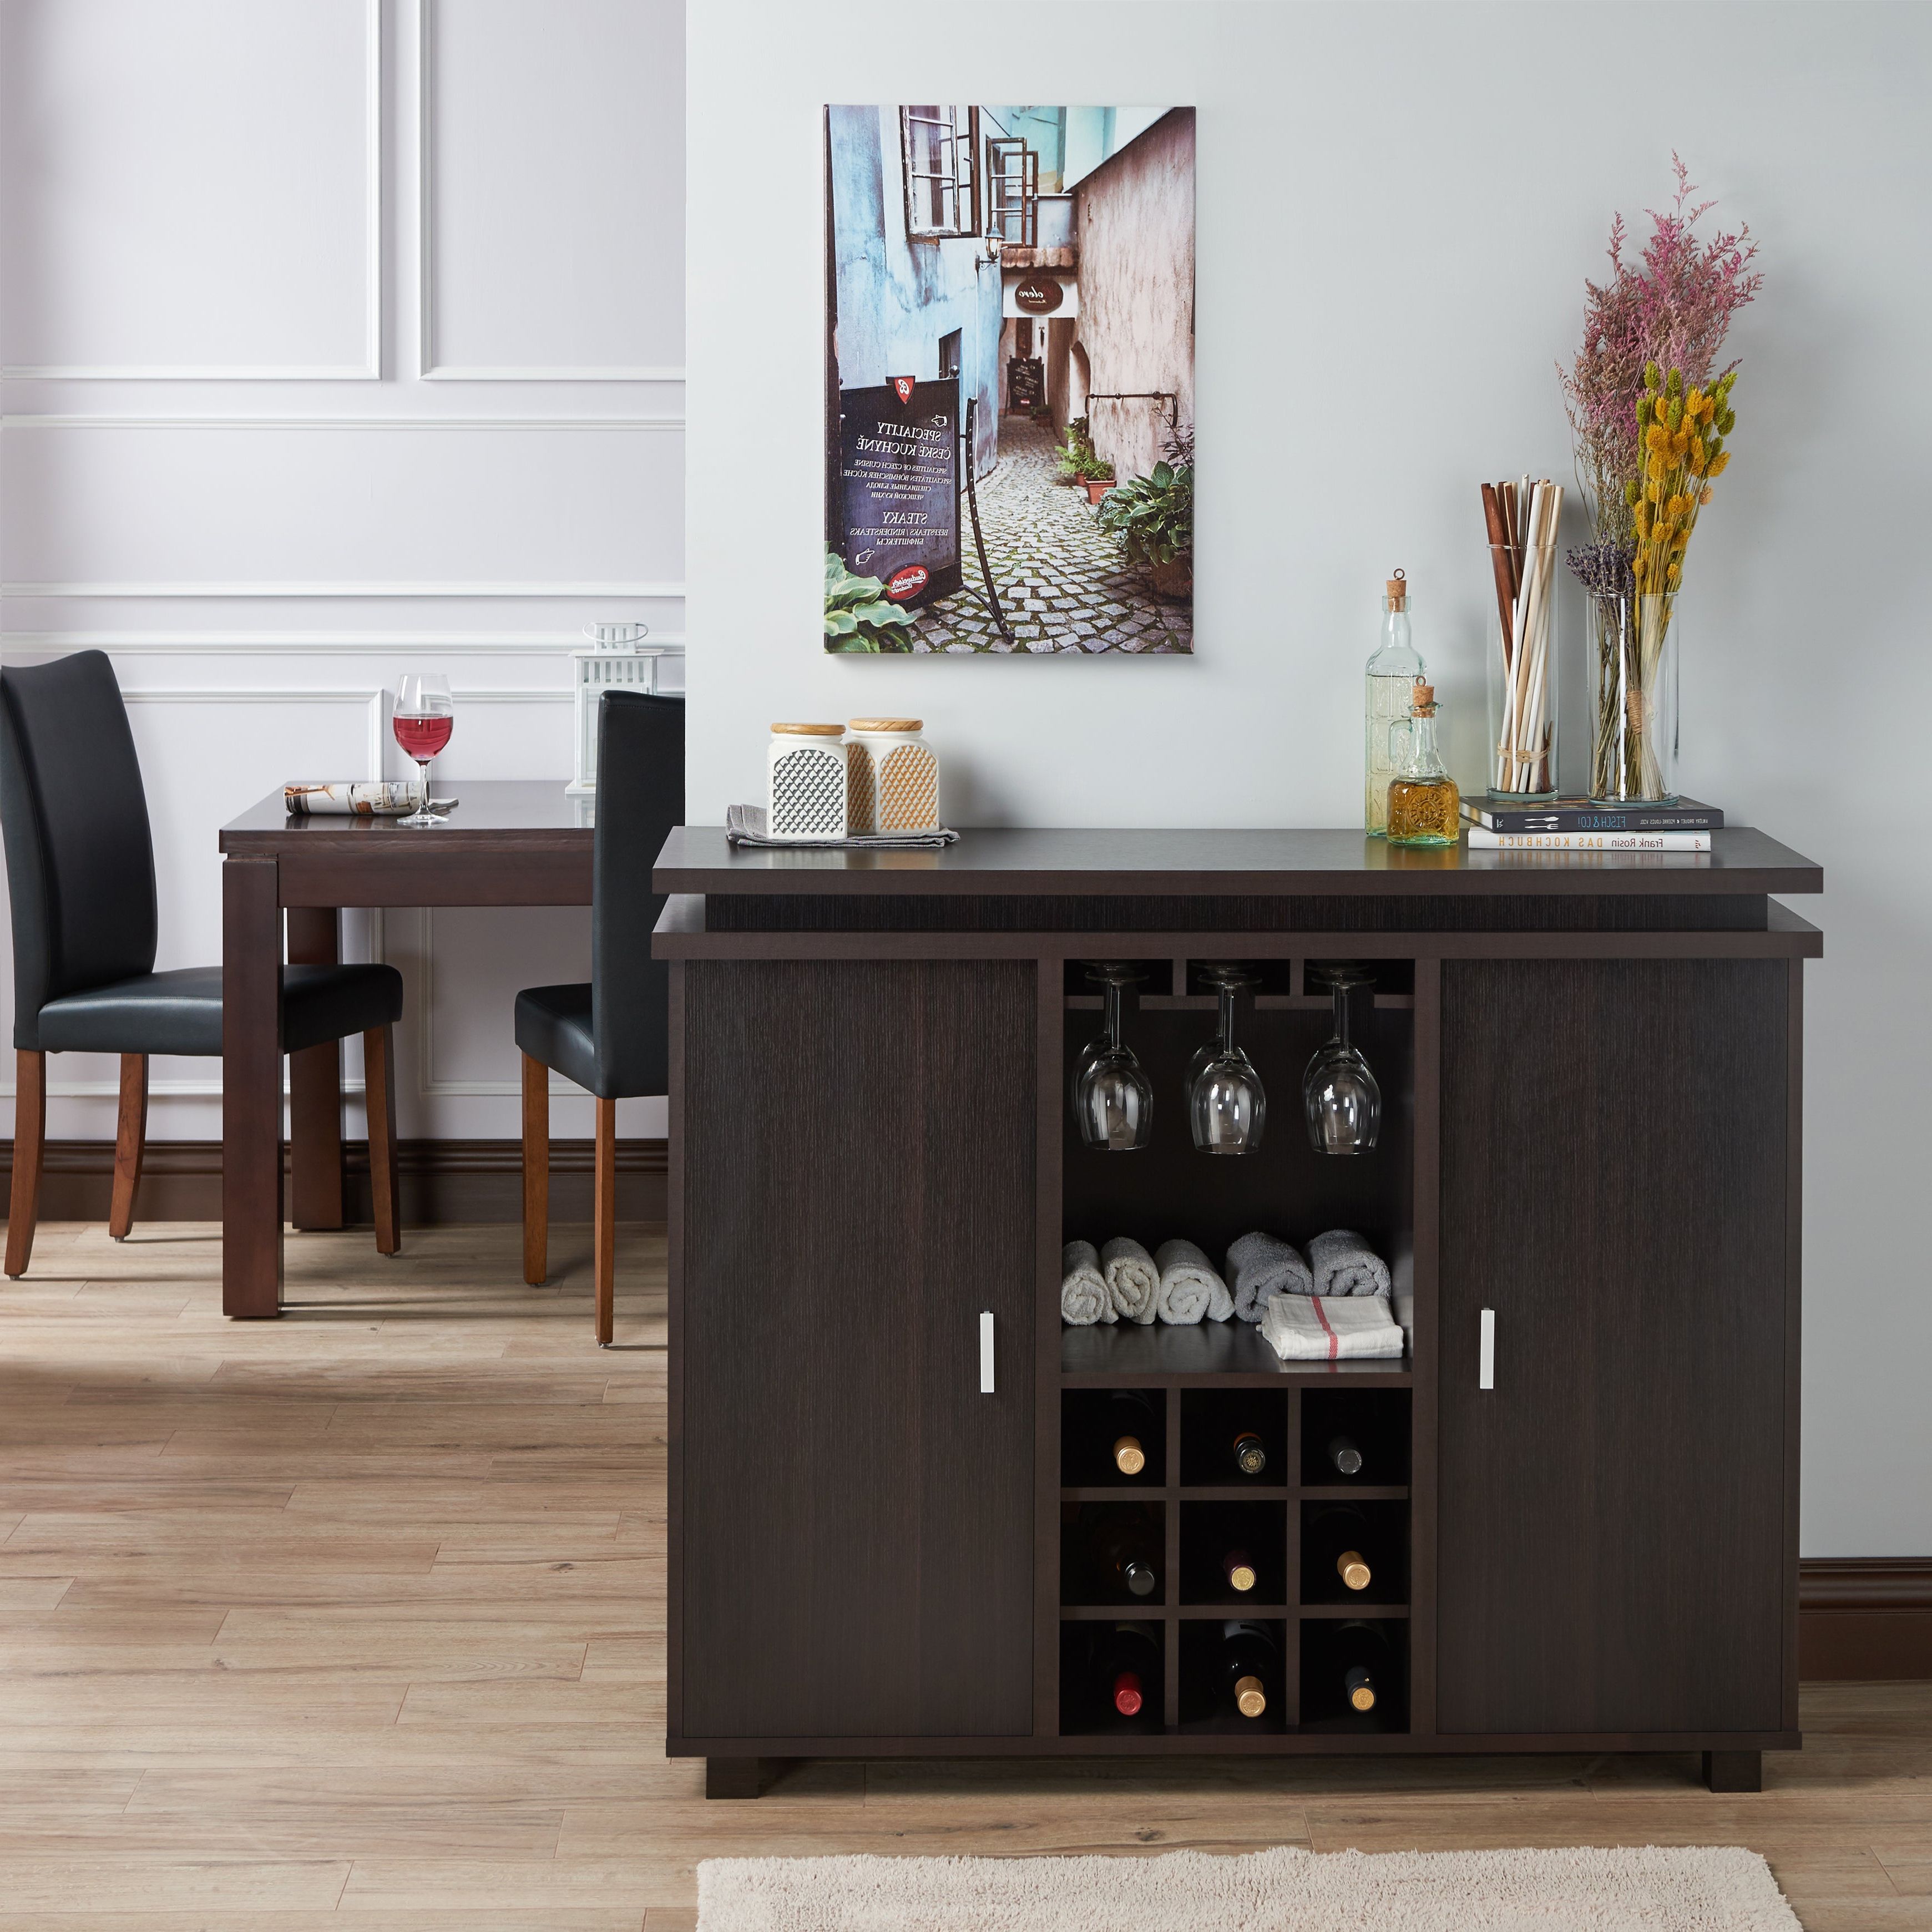 Furniture Of America Mirande Contemporary Espresso Dining Buffet With Wine  Storage Within Contemporary Espresso Dining Buffets (Gallery 1 of 20)